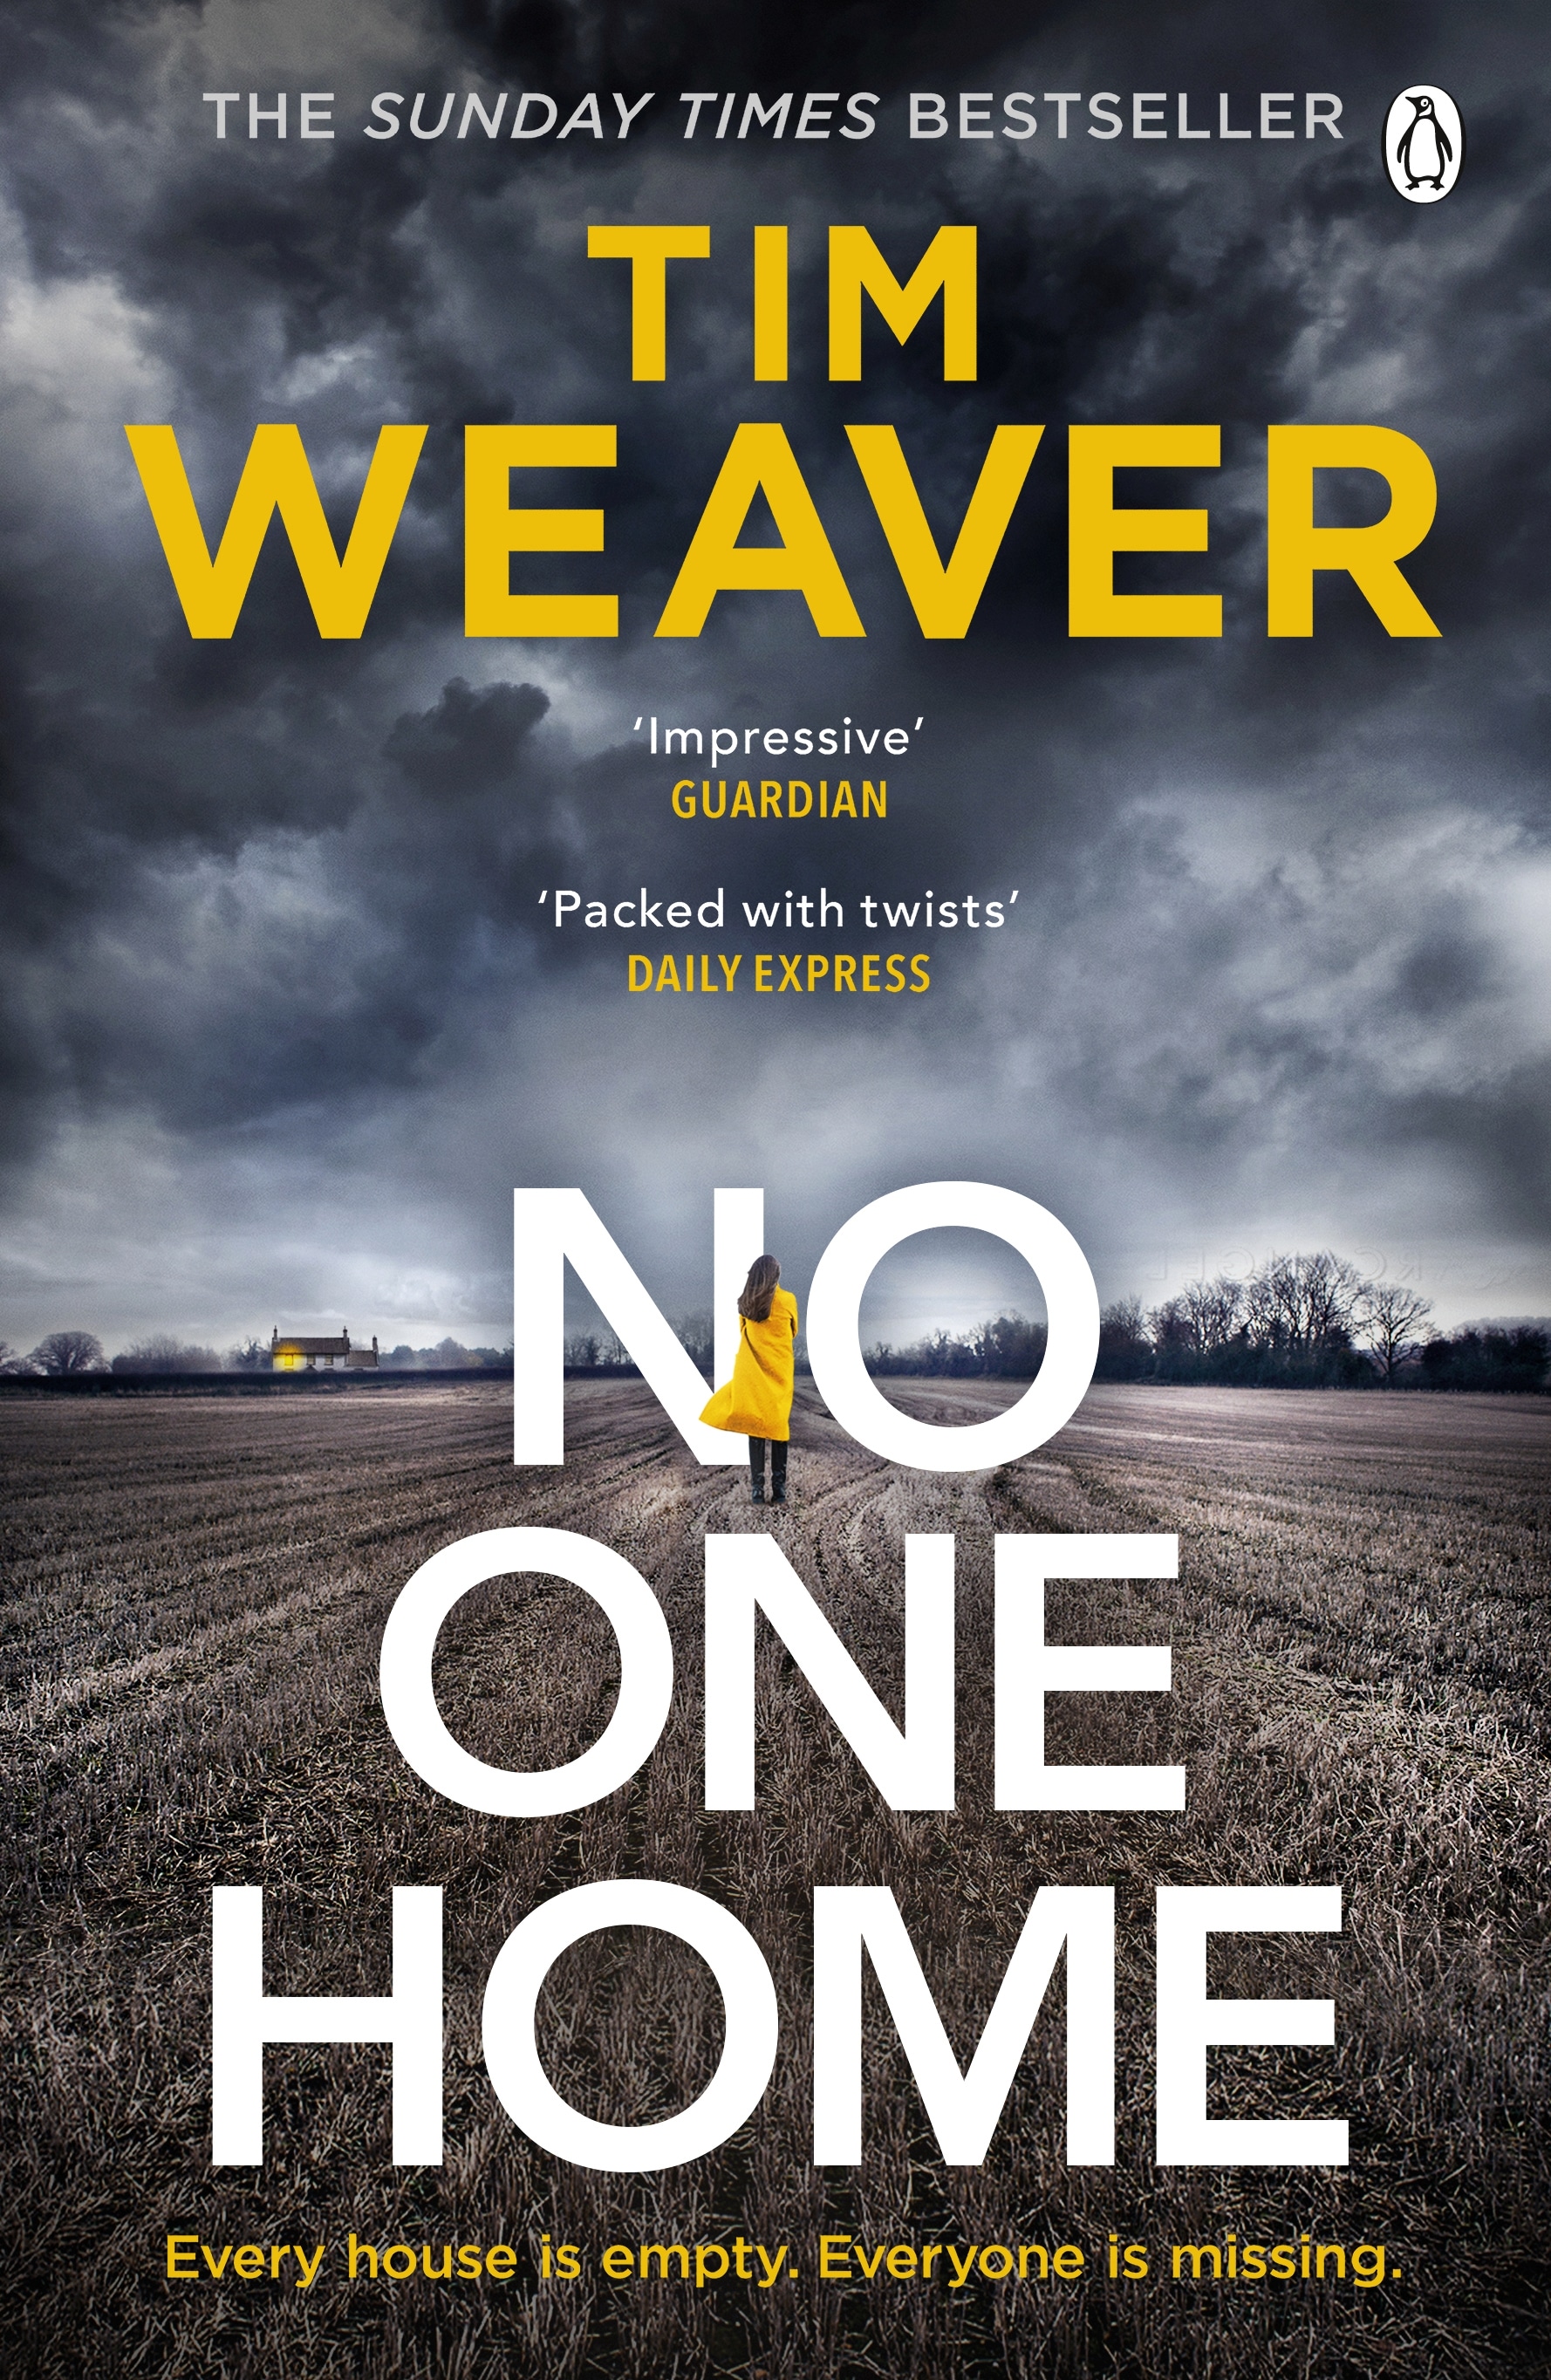 Book “No One Home” by Tim Weaver — February 20, 2020